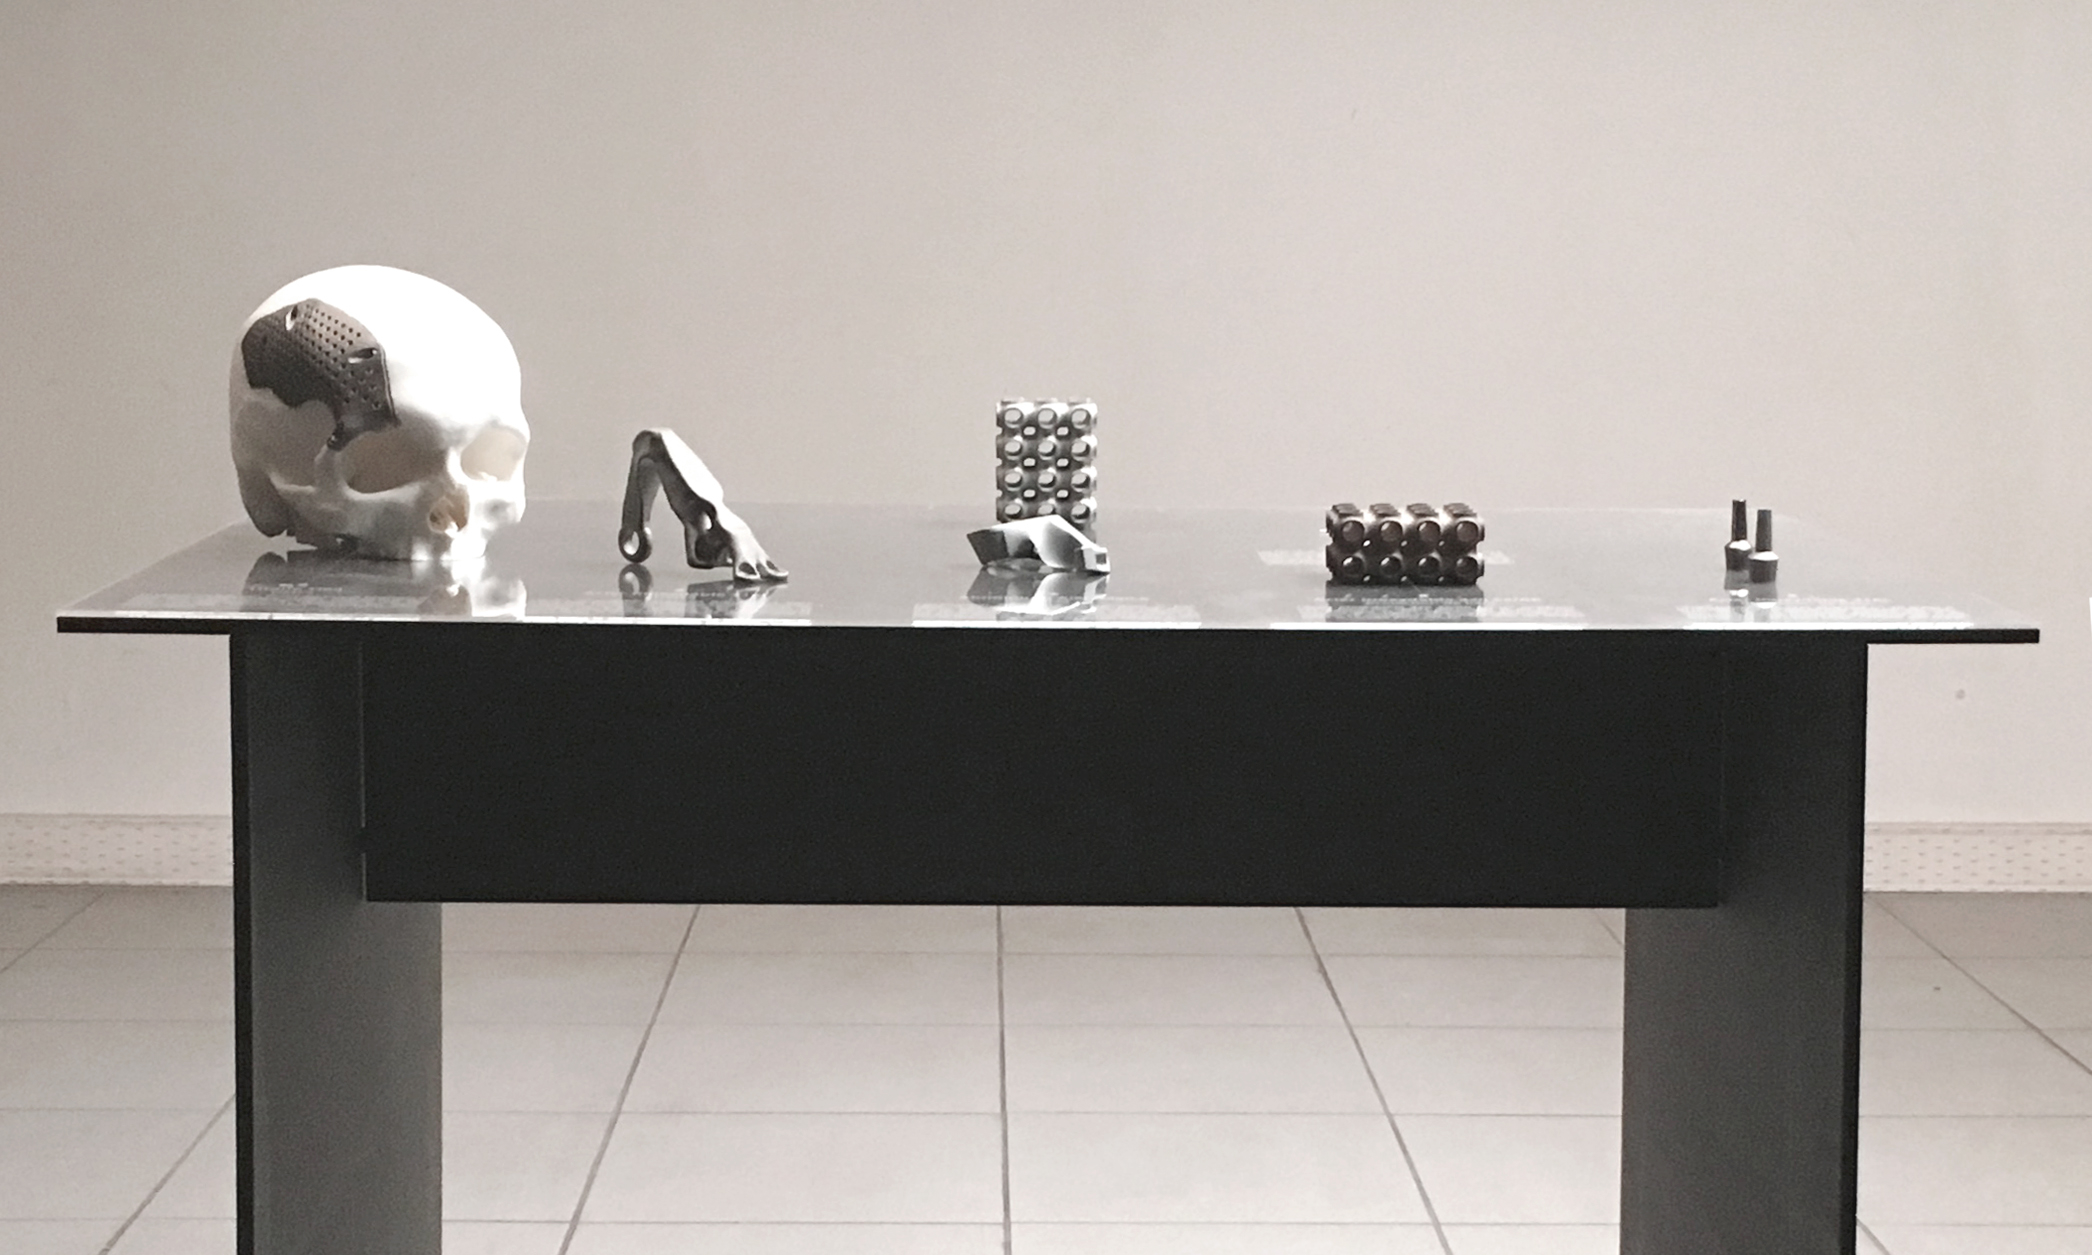 How we used 3D printing to create furniture along with laser cutting | Sculpteo Blog